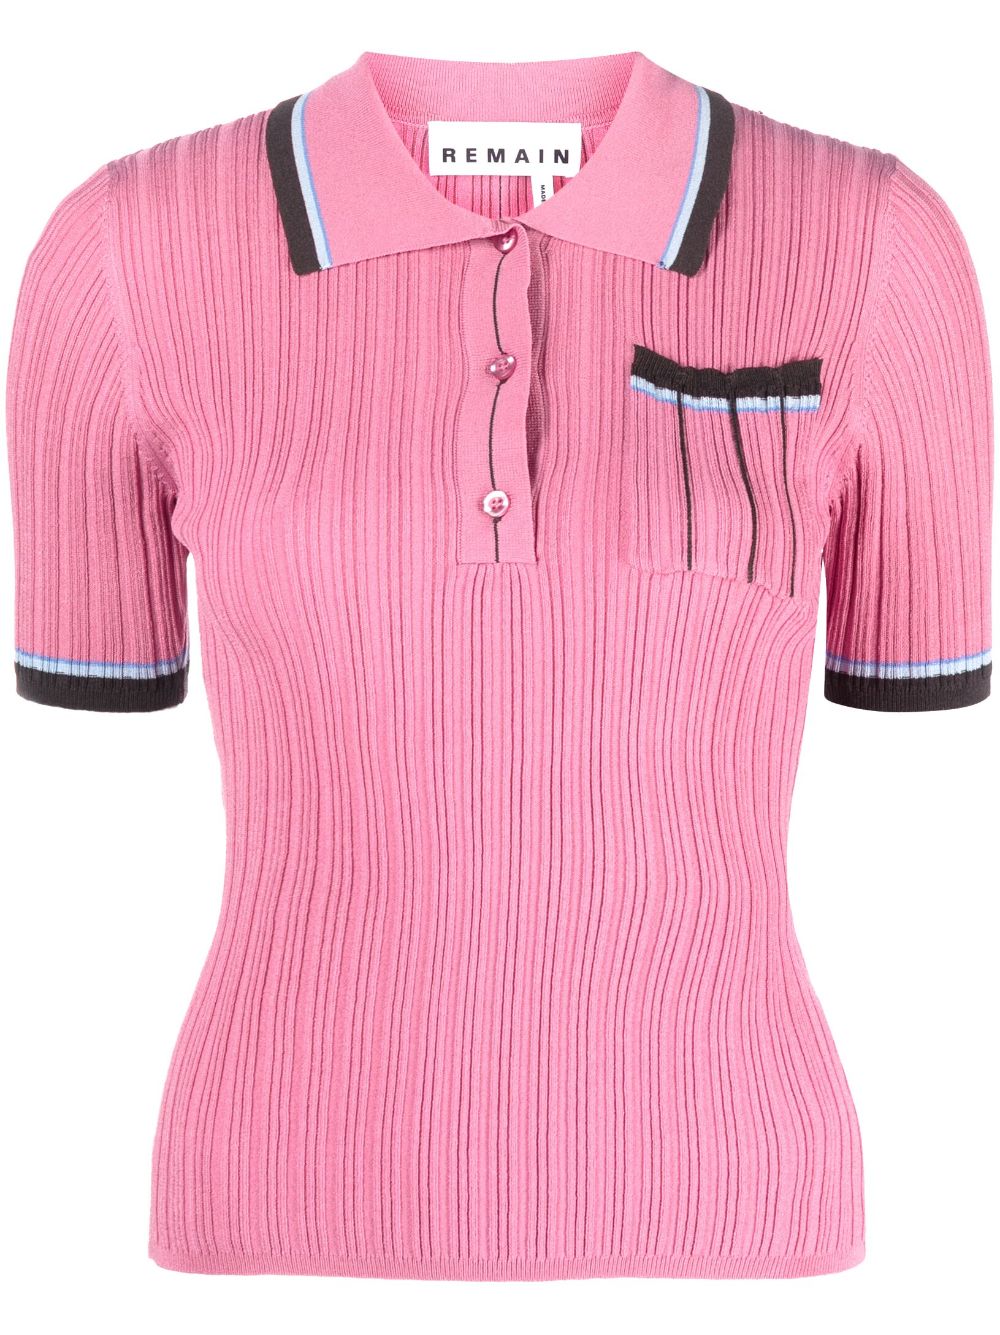 REMAIN short-sleeve ribbed-knit top - Pink von REMAIN